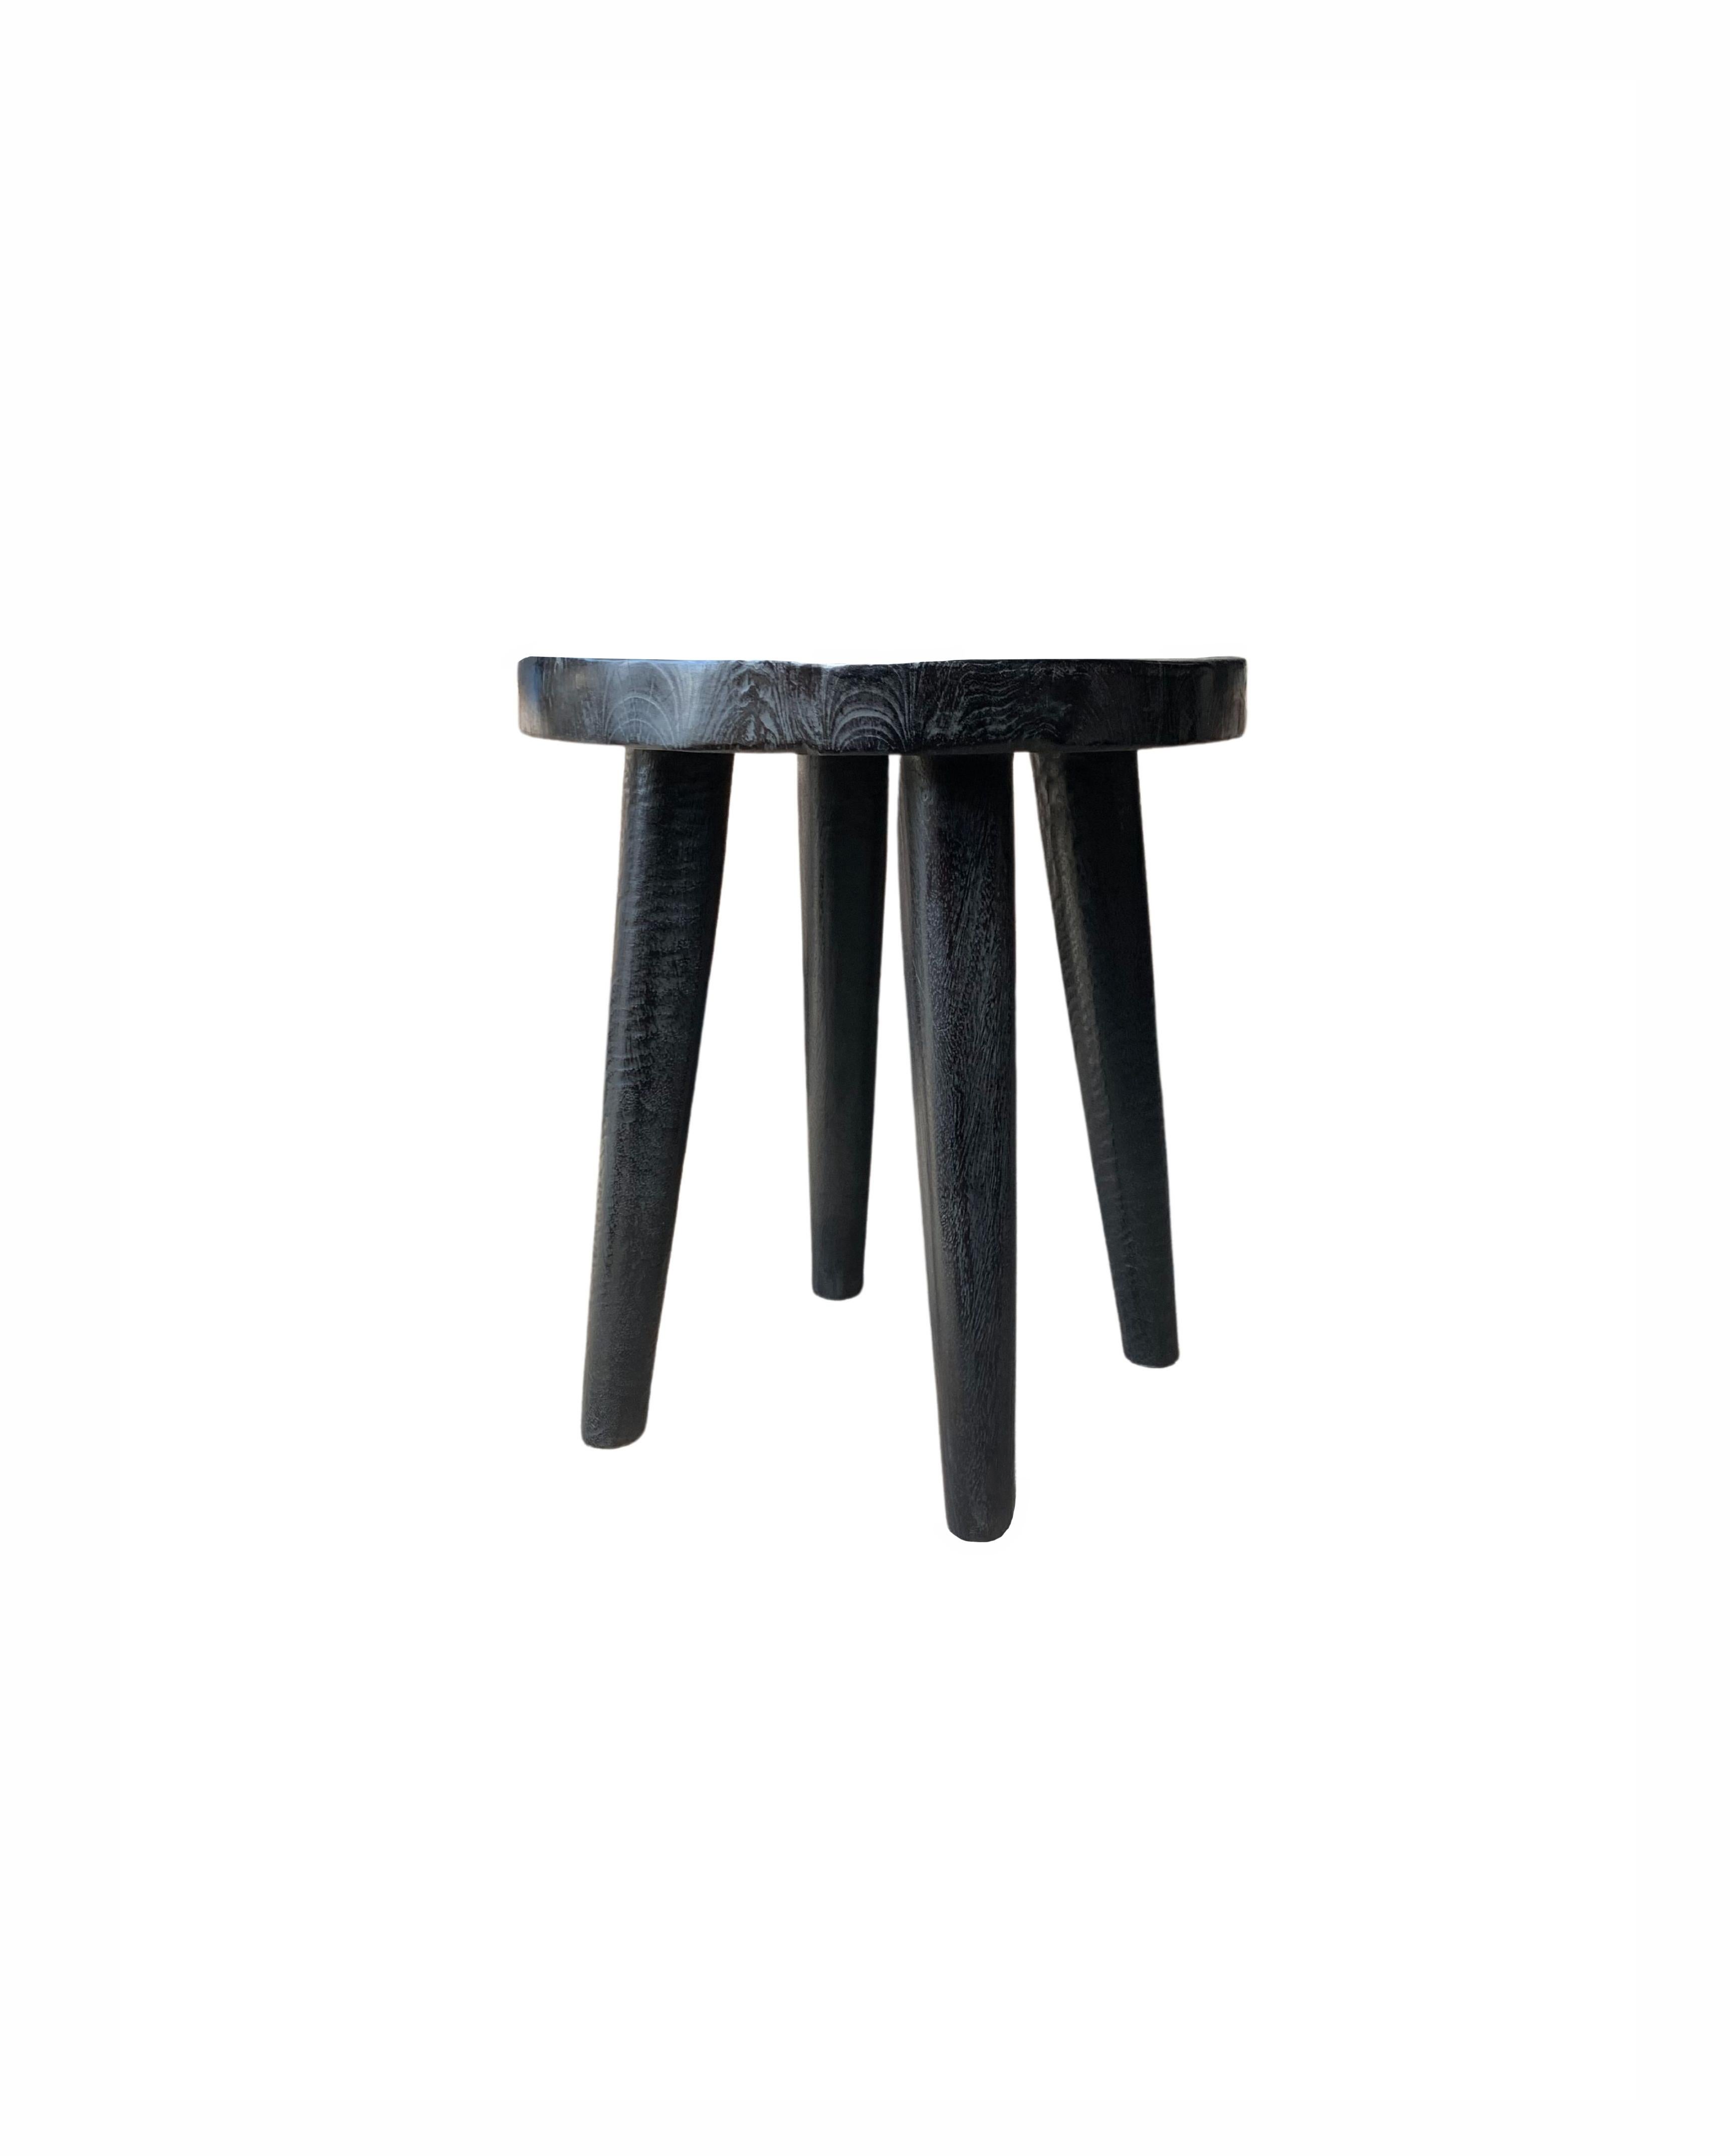 A sculptural mango wood stool with a mix of textures and shades. This stool features wonderful elongated and slender legs. The legs have been sanded down meticulously to create a smooth texture and contrast in colour and textures to the seat. The